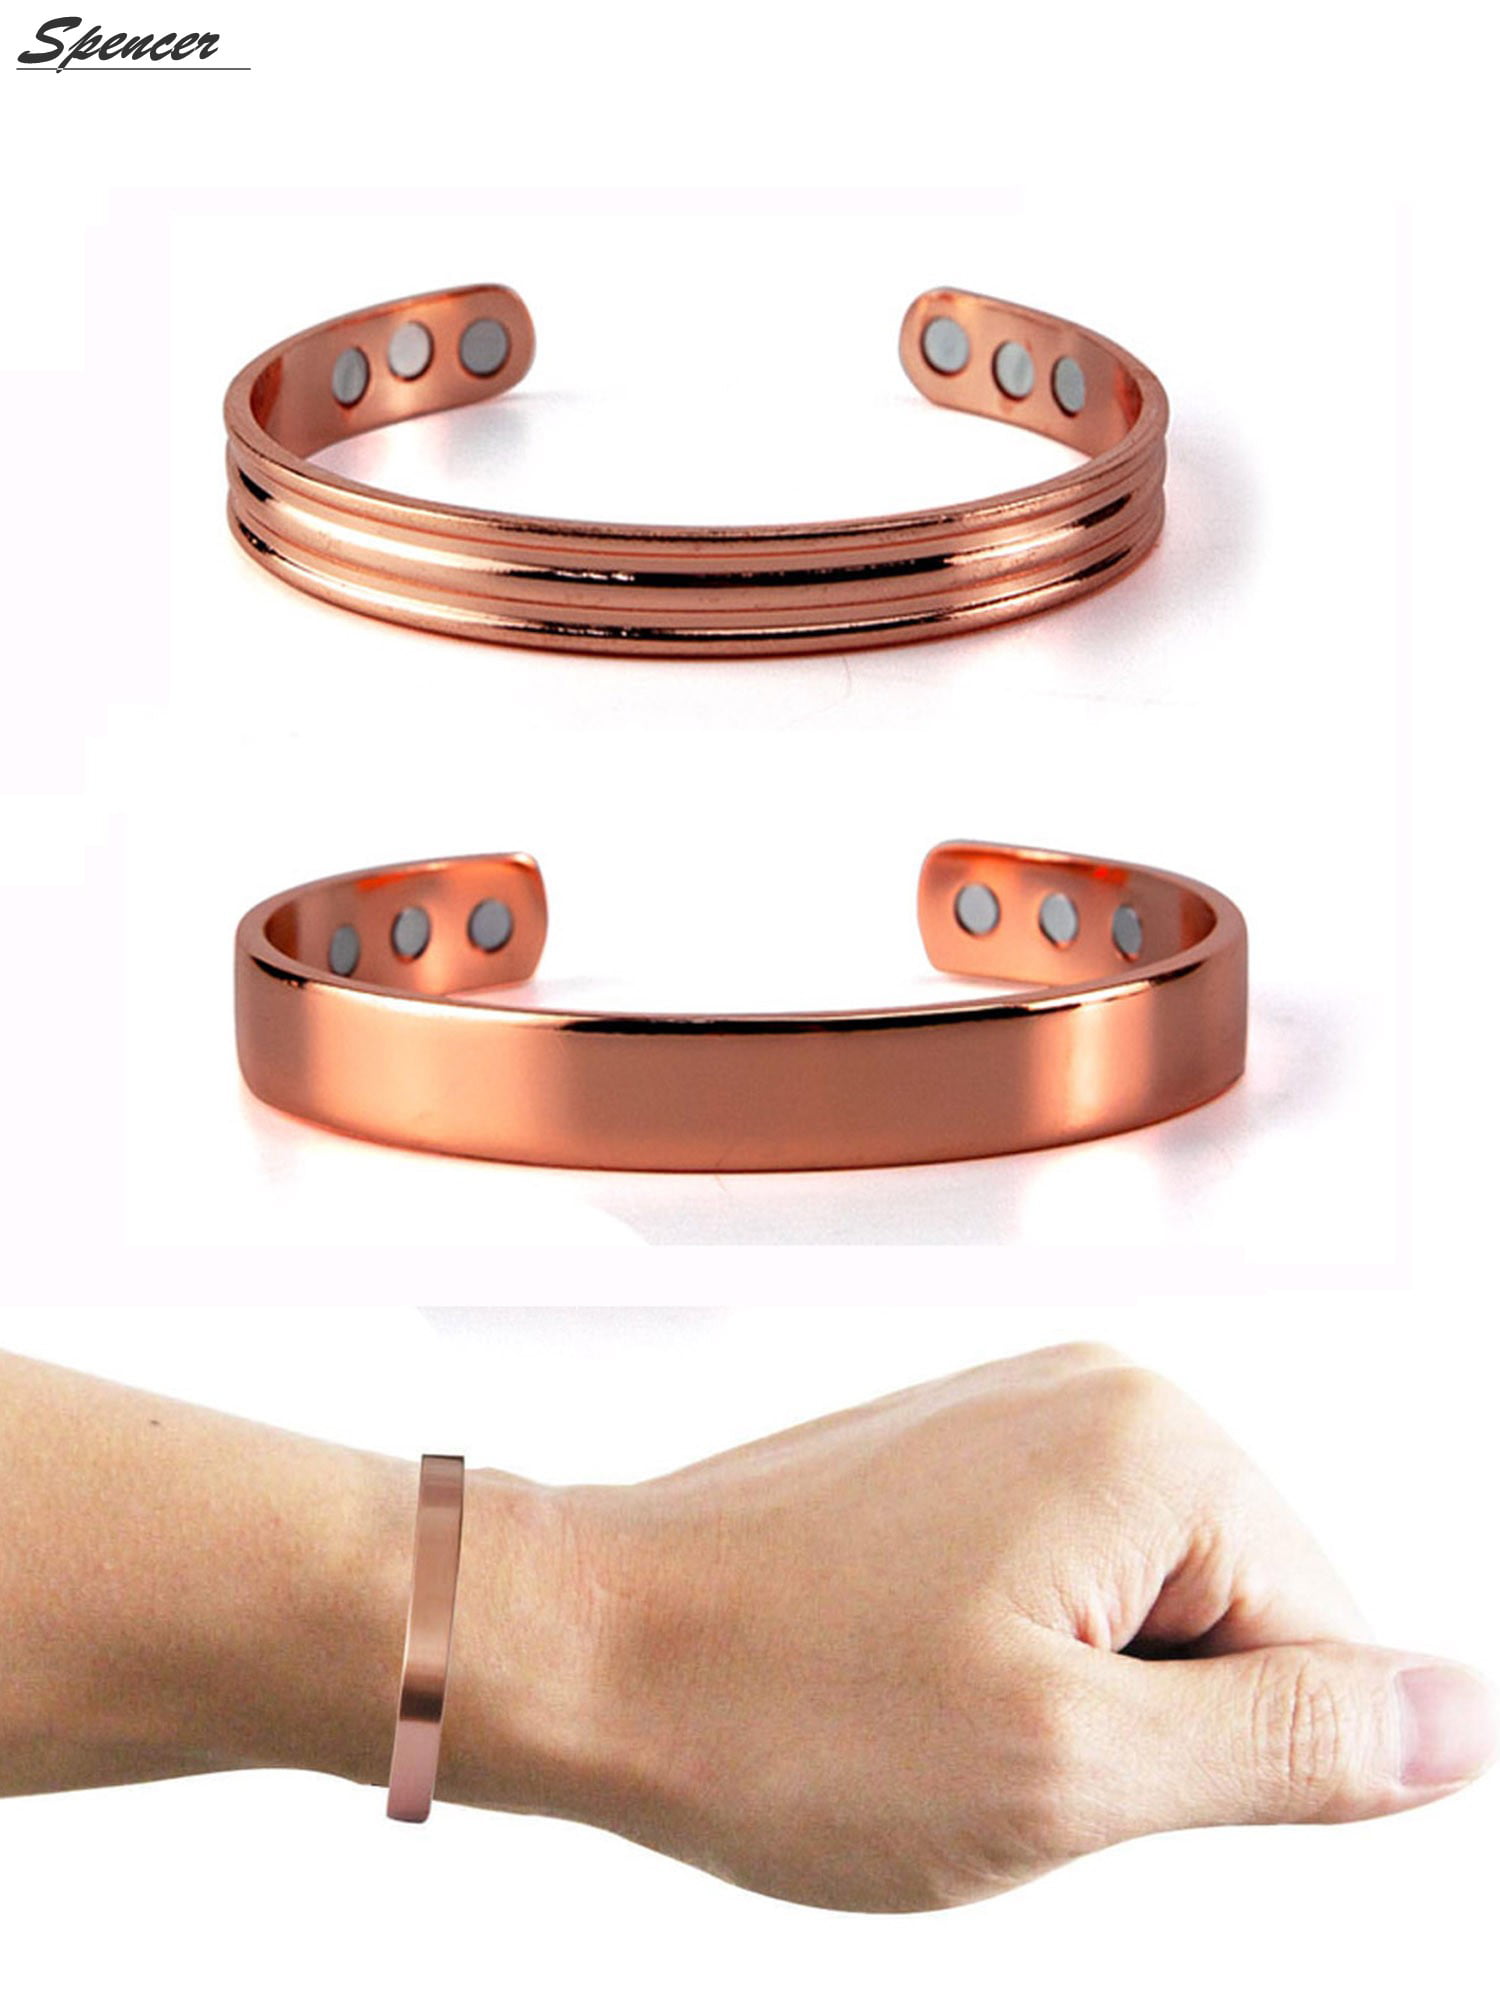 ENET Bracelet Pure Copper Magnetic Therapy Arthritis Pain Relief Bangle